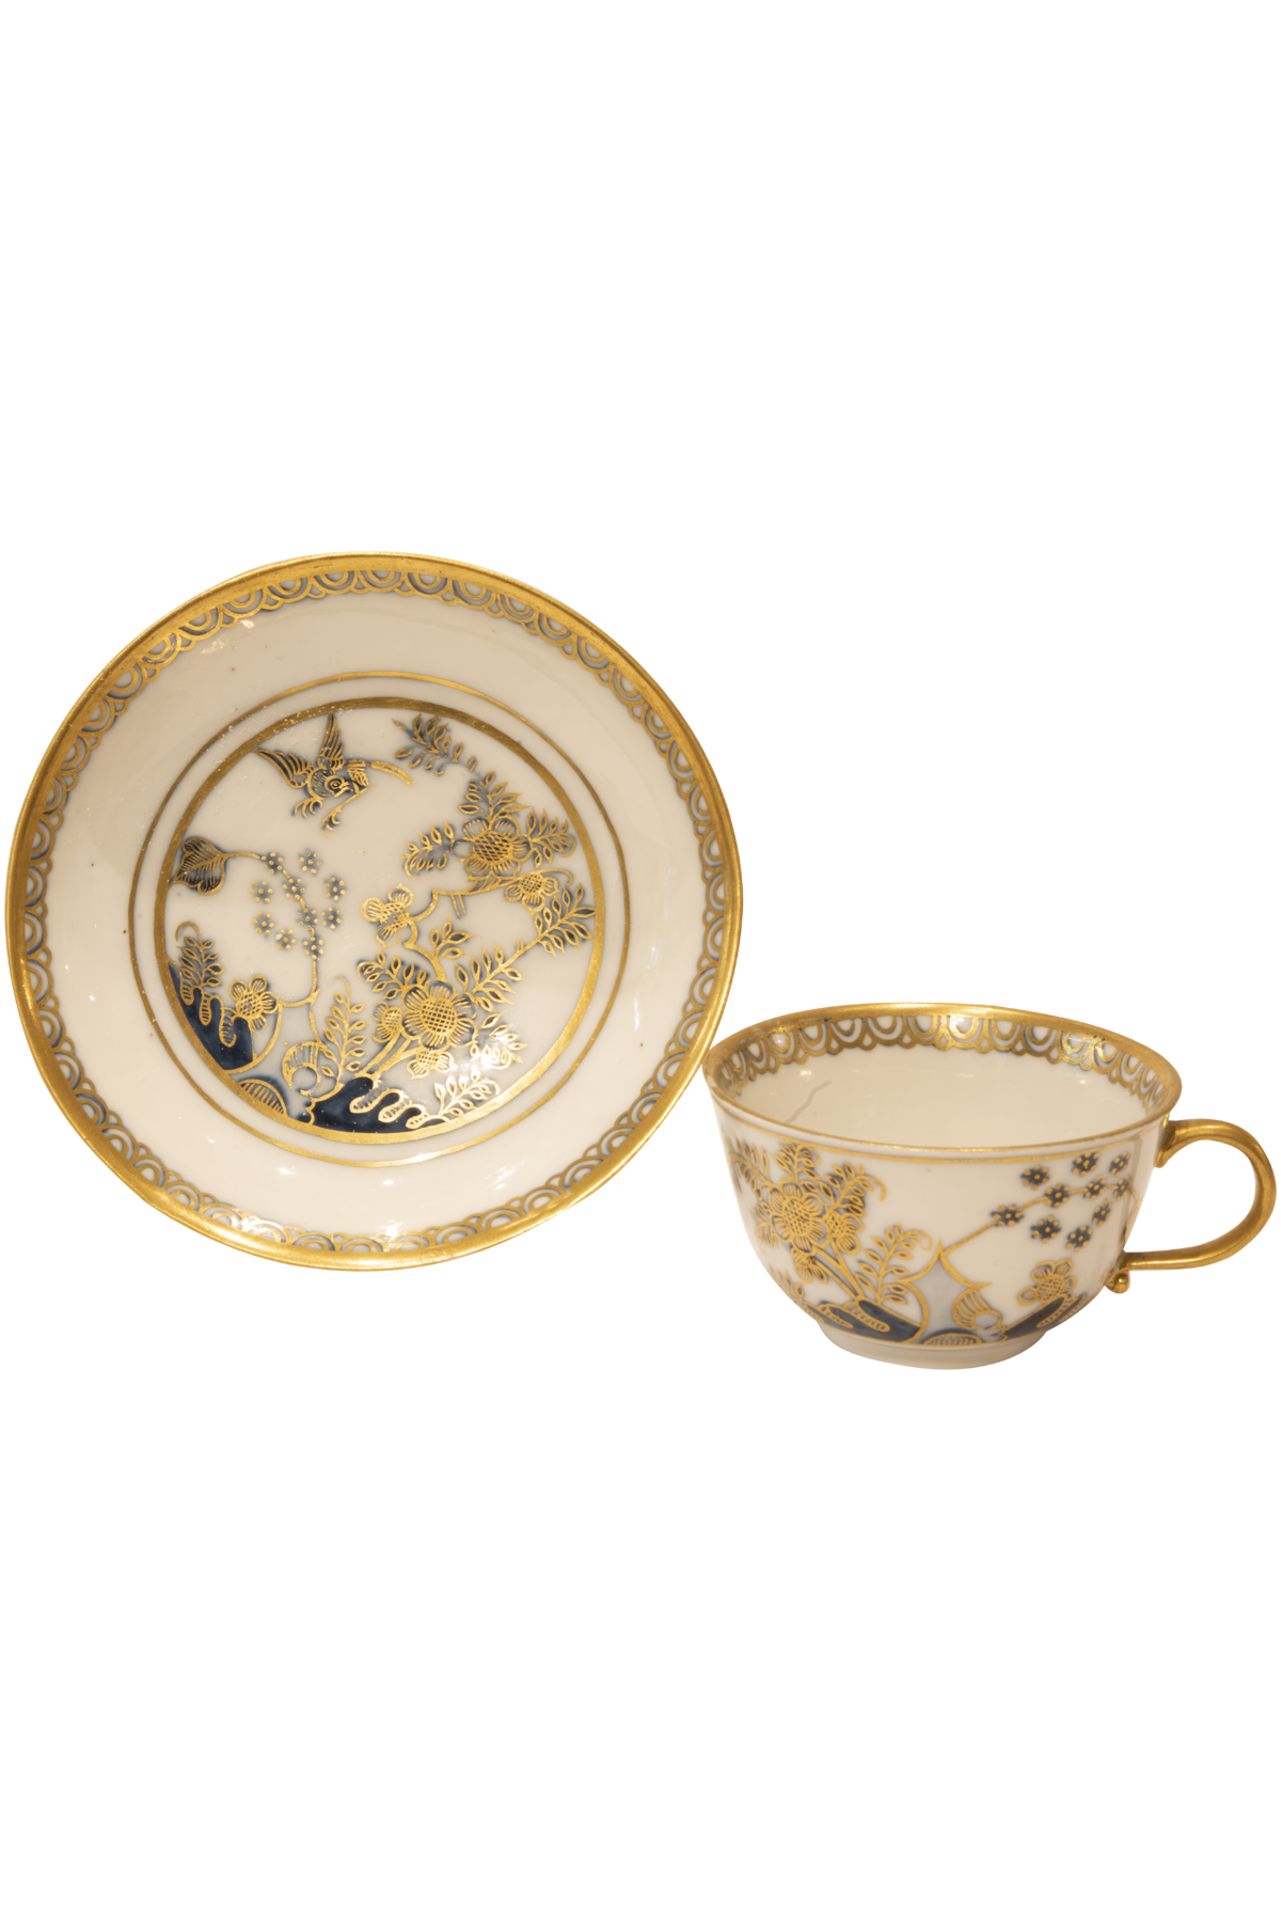 Two Cups with saucers, Meissen around 1740 - Image 3 of 6